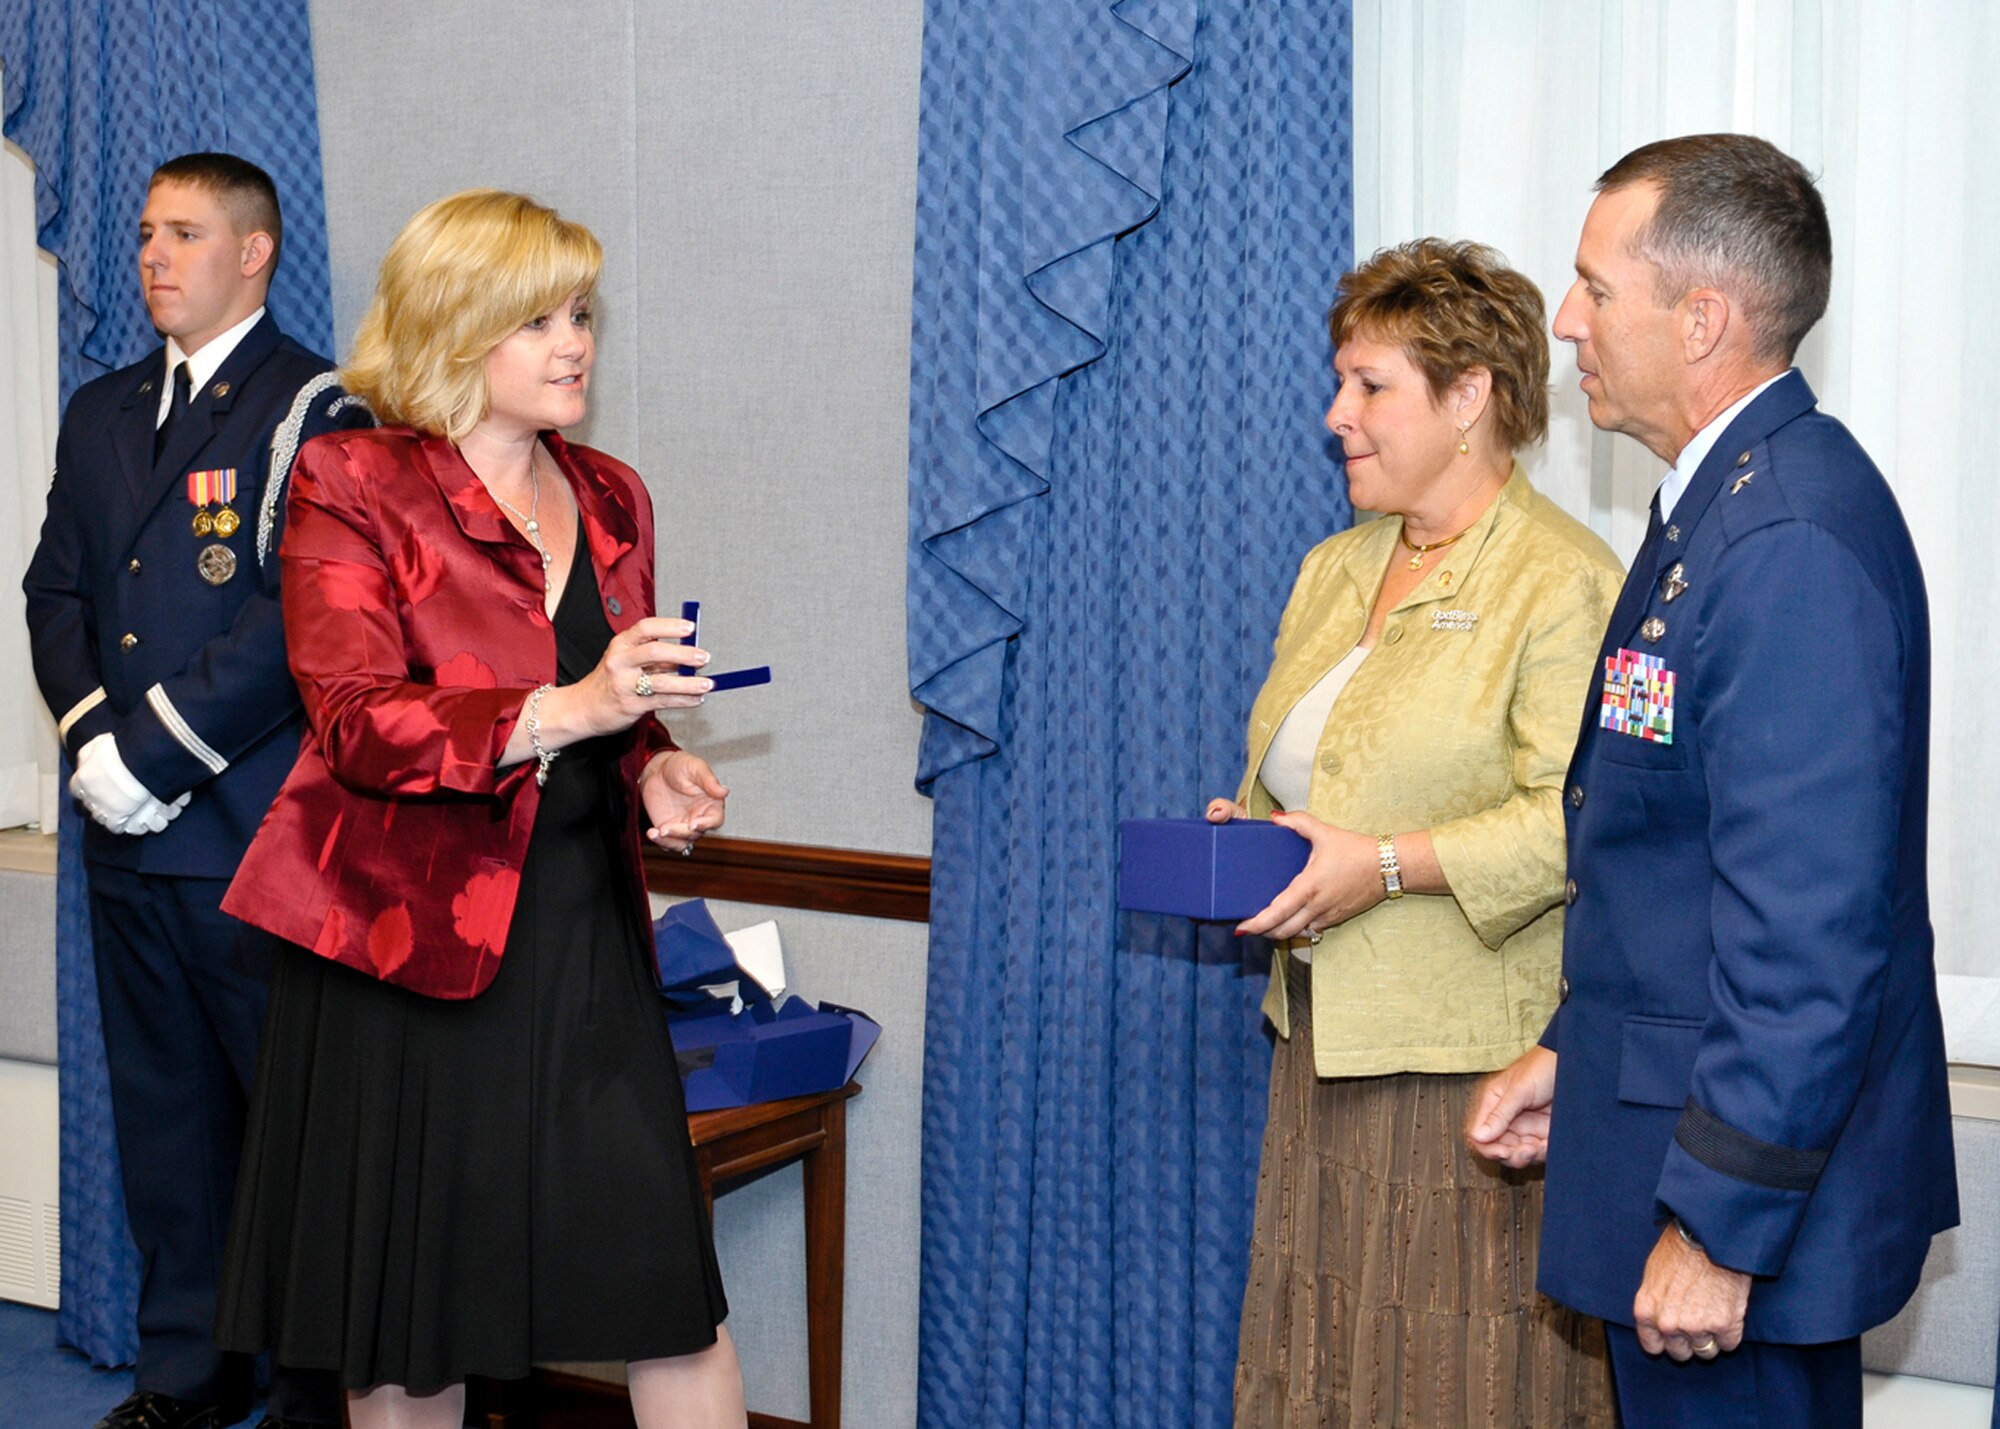 Sharon O'Malley Burg, daughter of the late Gen. Jerome and Diane O'Malley, presents Brig. Gen. Brett Williams with a set of brigadier general rank worn by General O'Malley as a special tribute to carry on the O'Malley legacy.  The presentation of the rank was part of a ceremony at the Pentagon Sept. 11, 2009, where General Williams and his wife, Marianne, were honored with the 2009 General and Mrs. Jerome O'Malley Award. The award was established after the O'Malleys, who were known for their leadership and contributions to Air Force families and communities, were killed in a plane crash in 1985.  (U.S. Air Force photo/Michael Pausic)